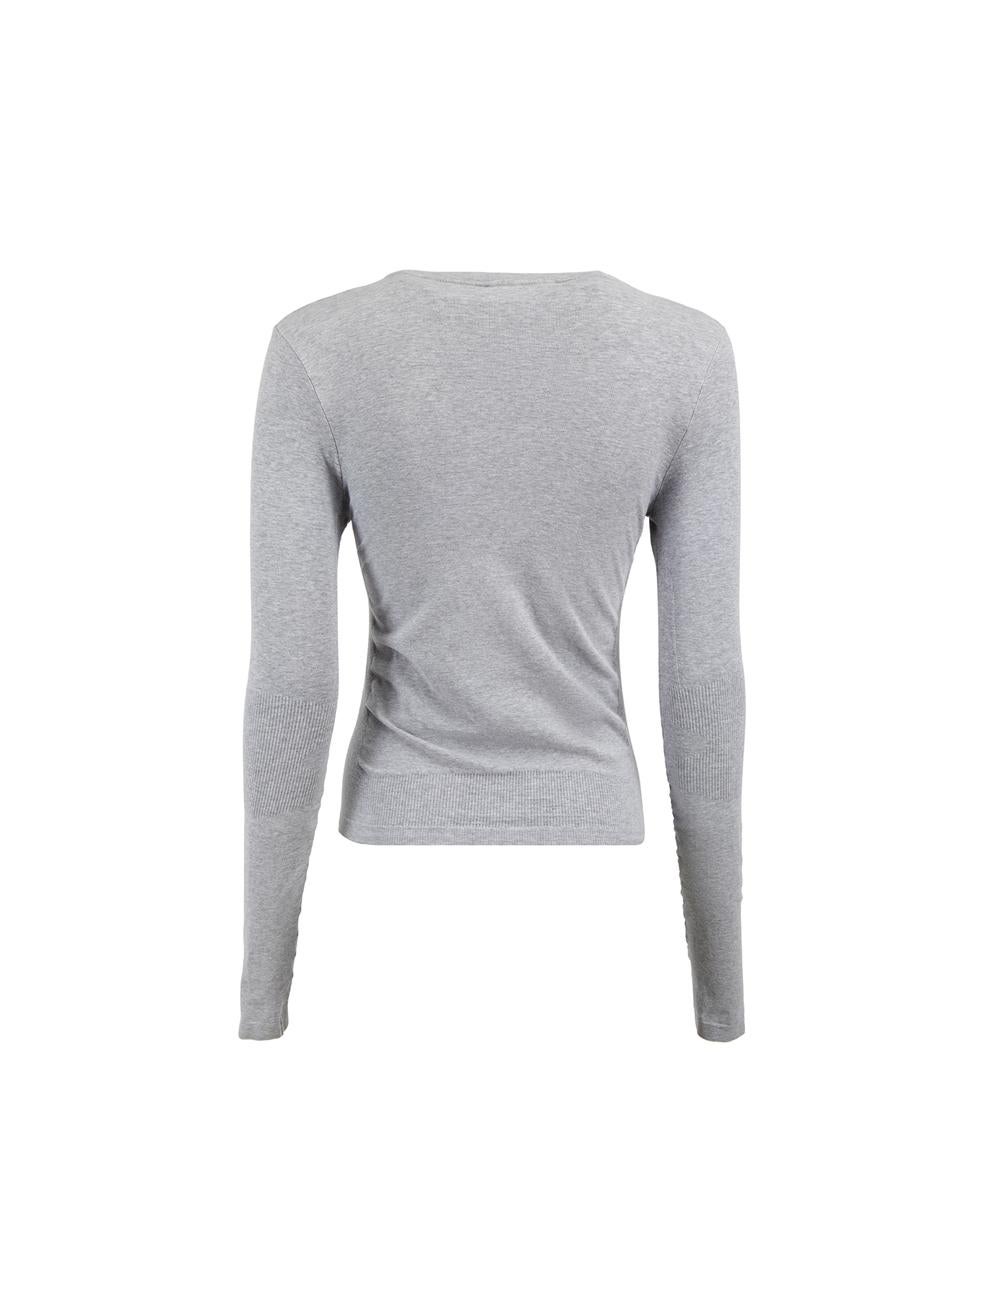 Gray Prada Sport Grey Ribbed Knit Accent Long Sleeve Top Size M For Sale